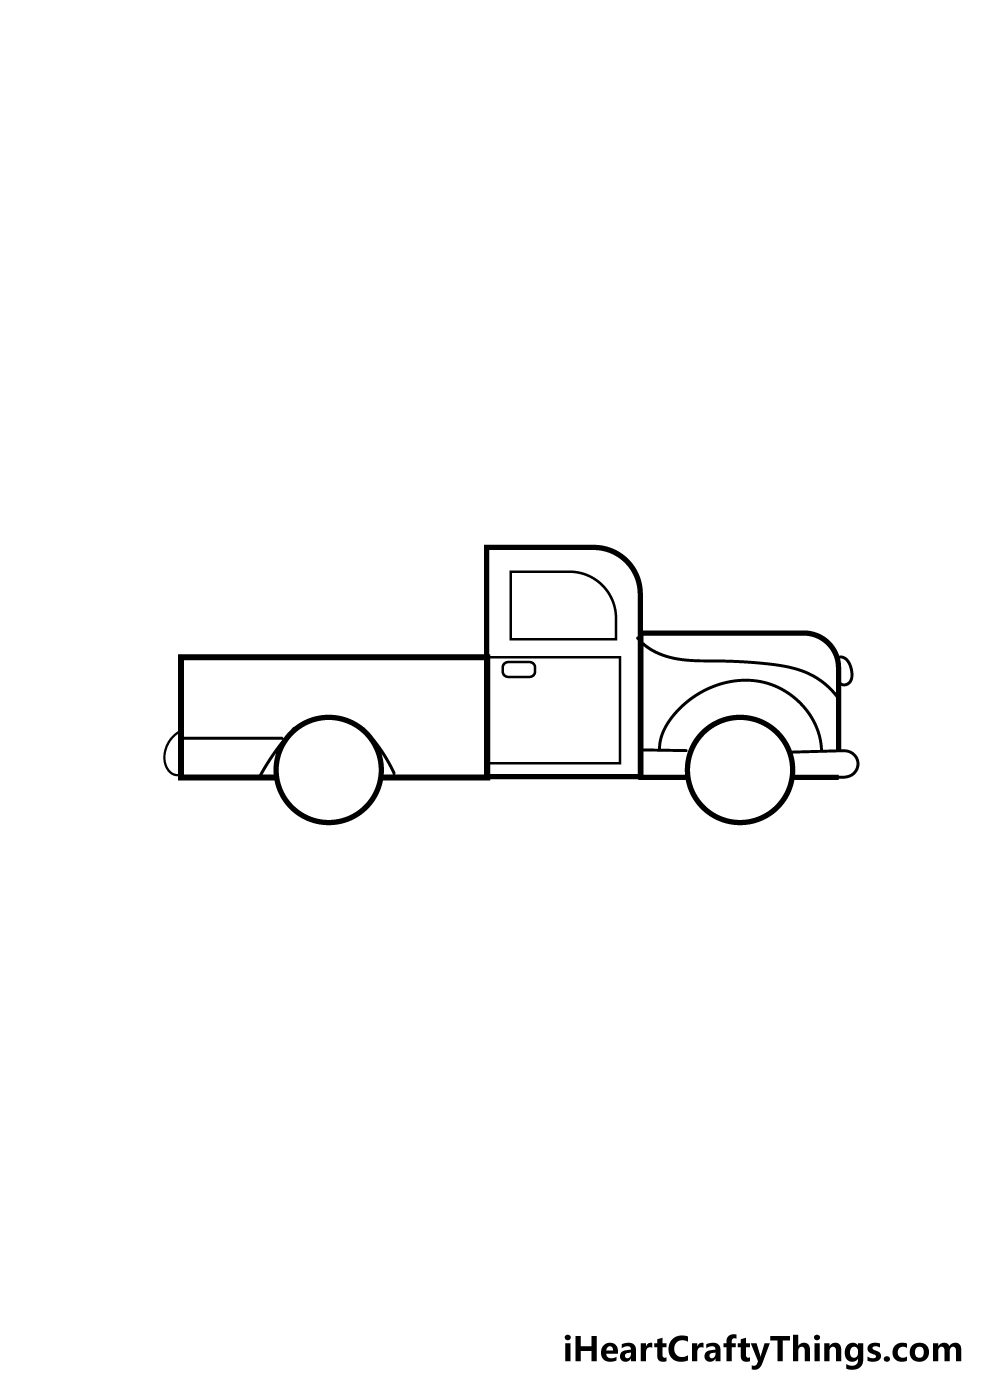 4 . step truck drawing